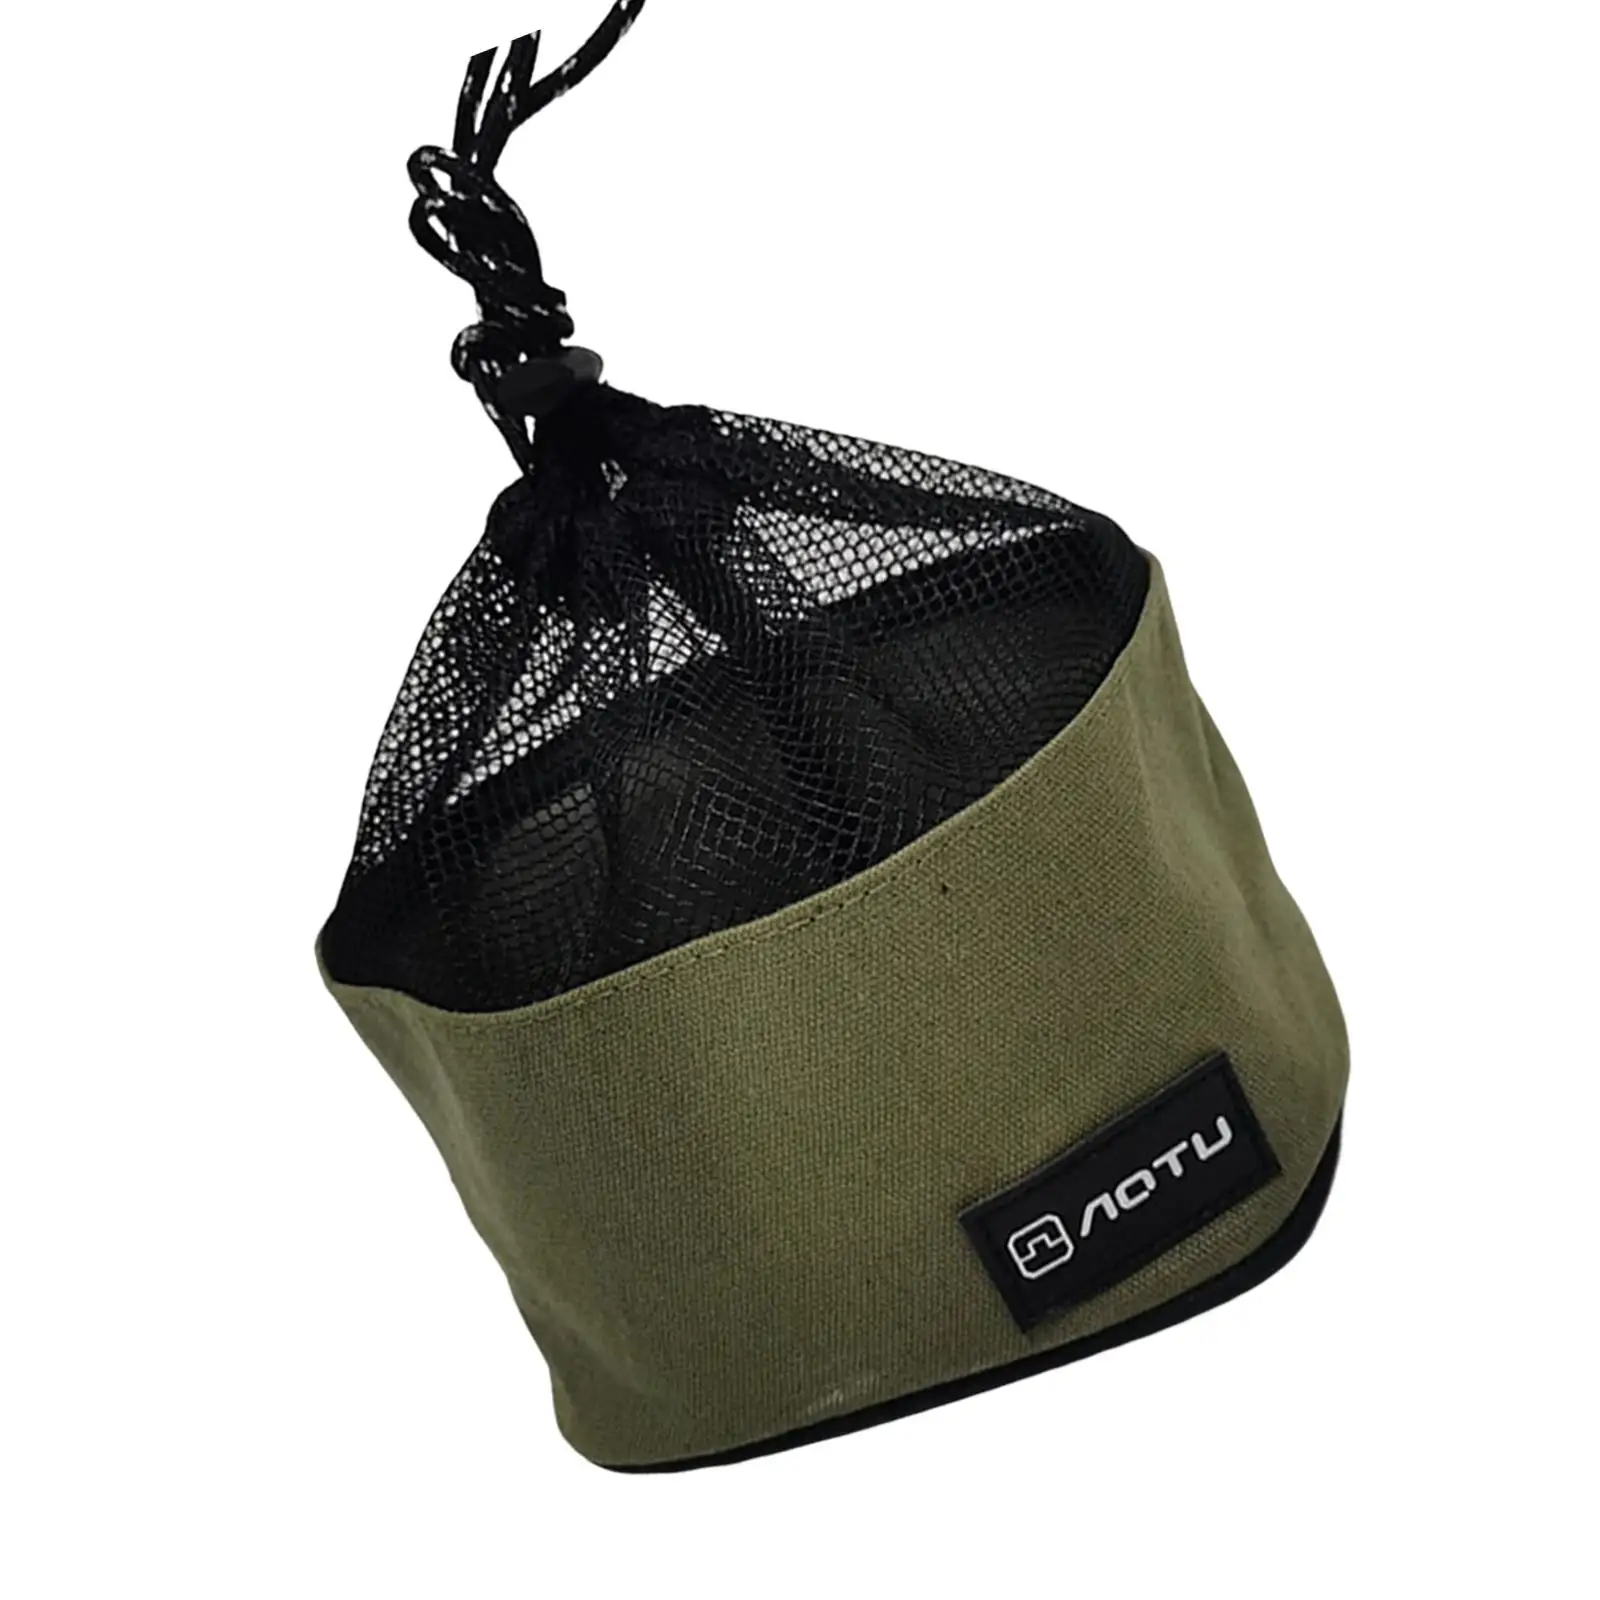 Portable Camping Cookware Storage Bag Drawstring Bag Equipment Case Tableware Storage for Outdoor BBQ Barbecue Picnic Travel